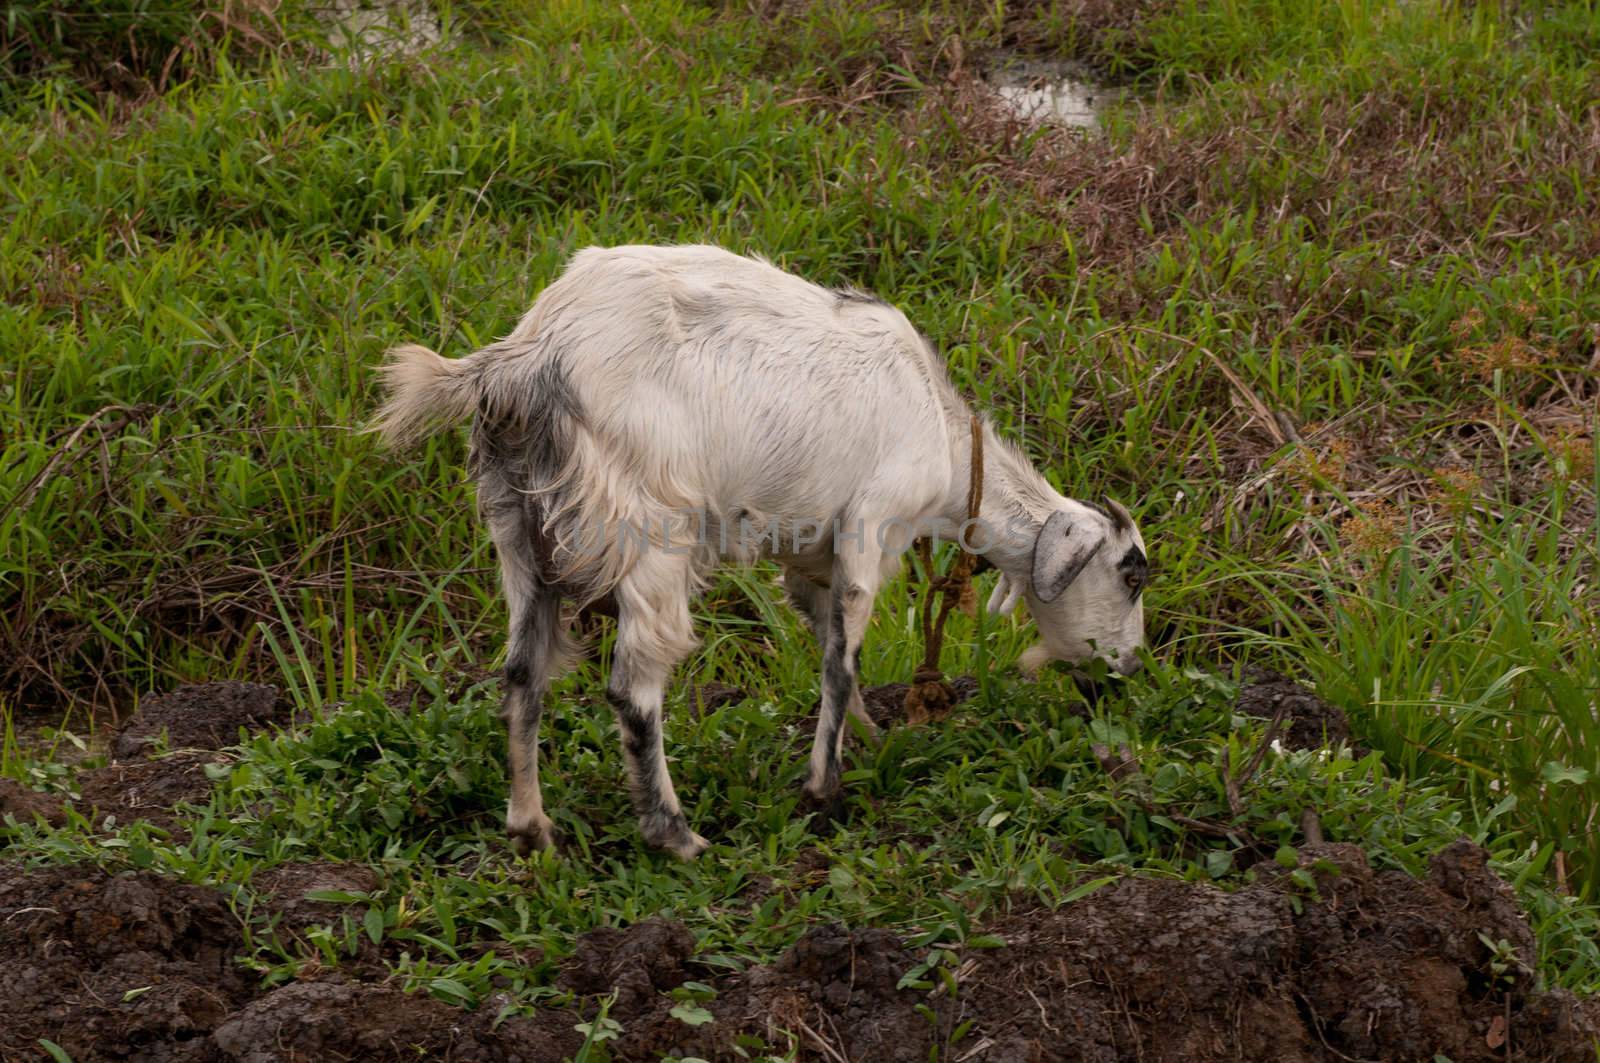 A solitary goat on a leash at a meadow